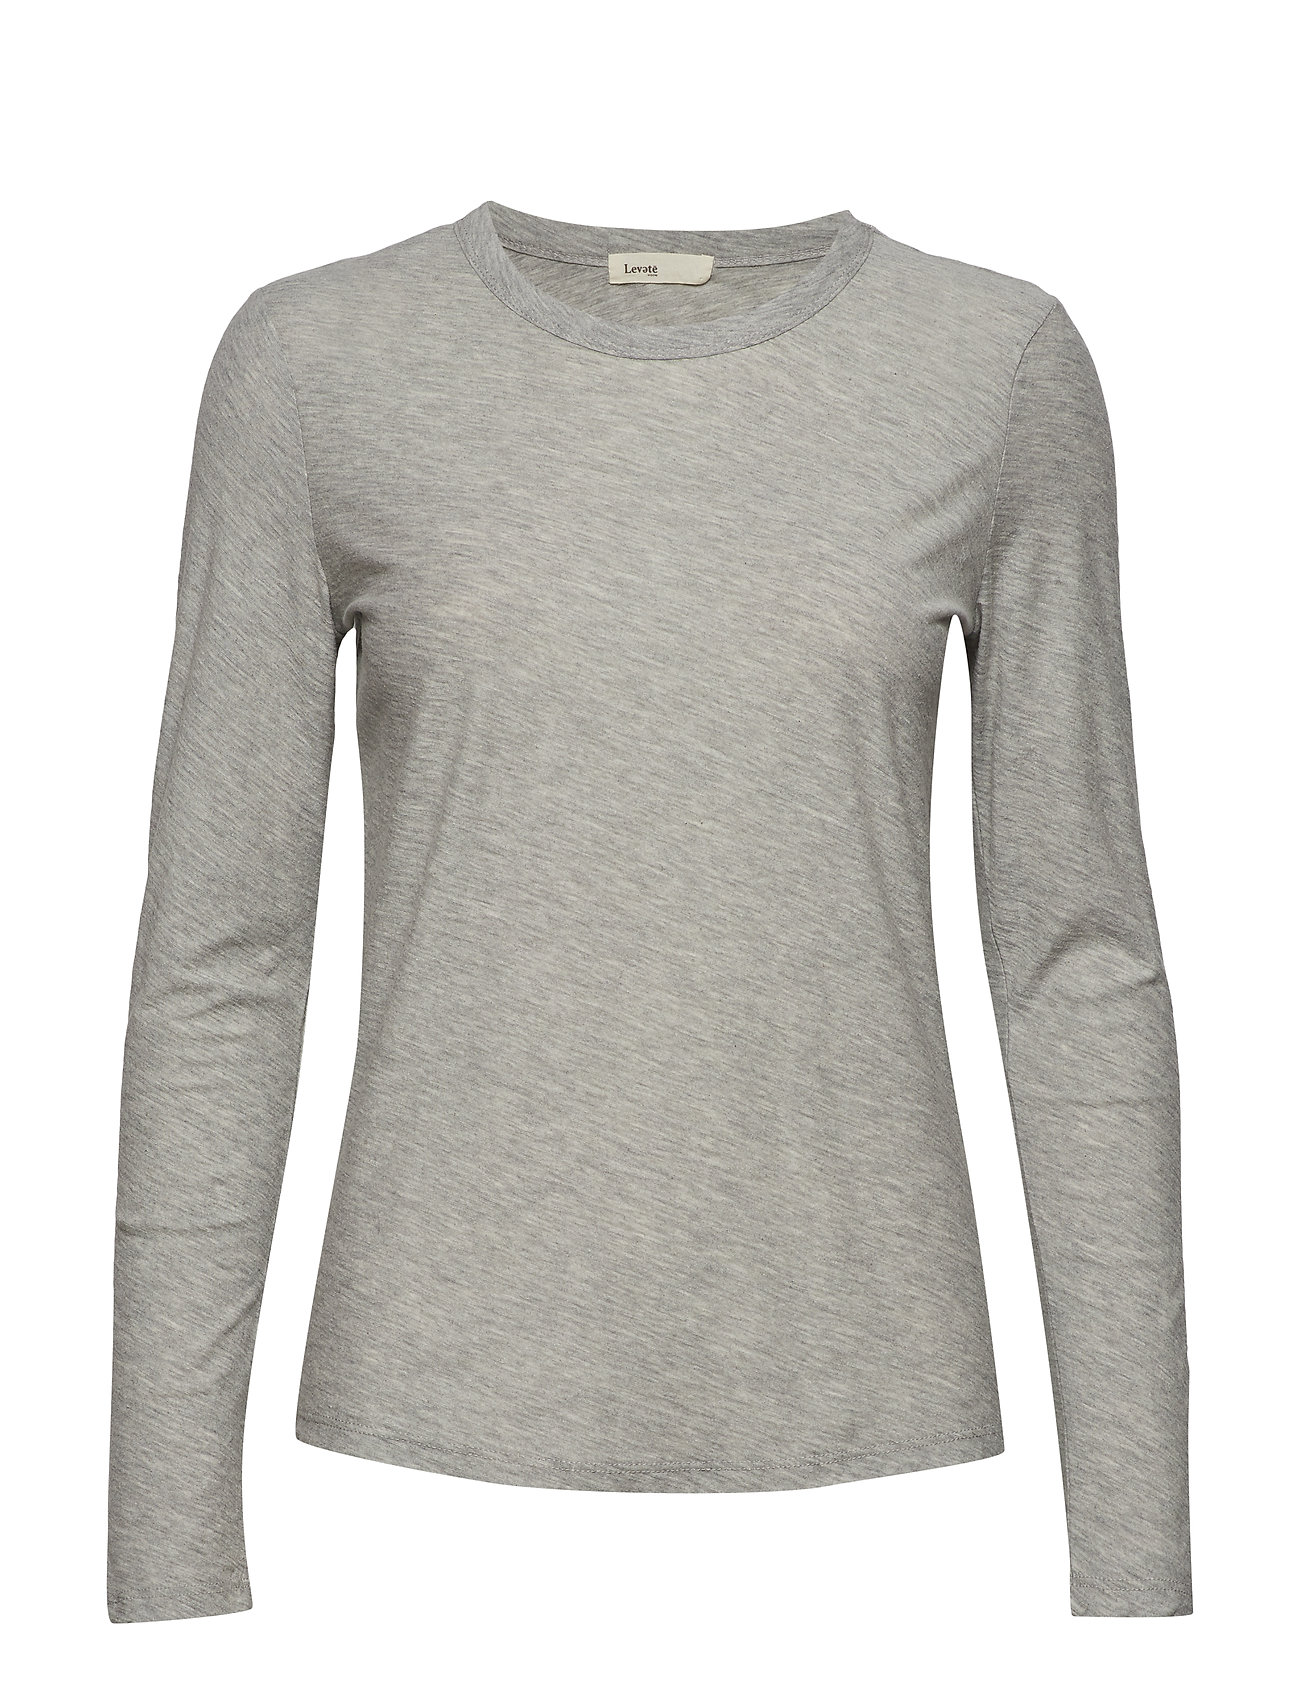 Lr-Any Tops T-shirts & Tops Long-sleeved Grey Levete Room